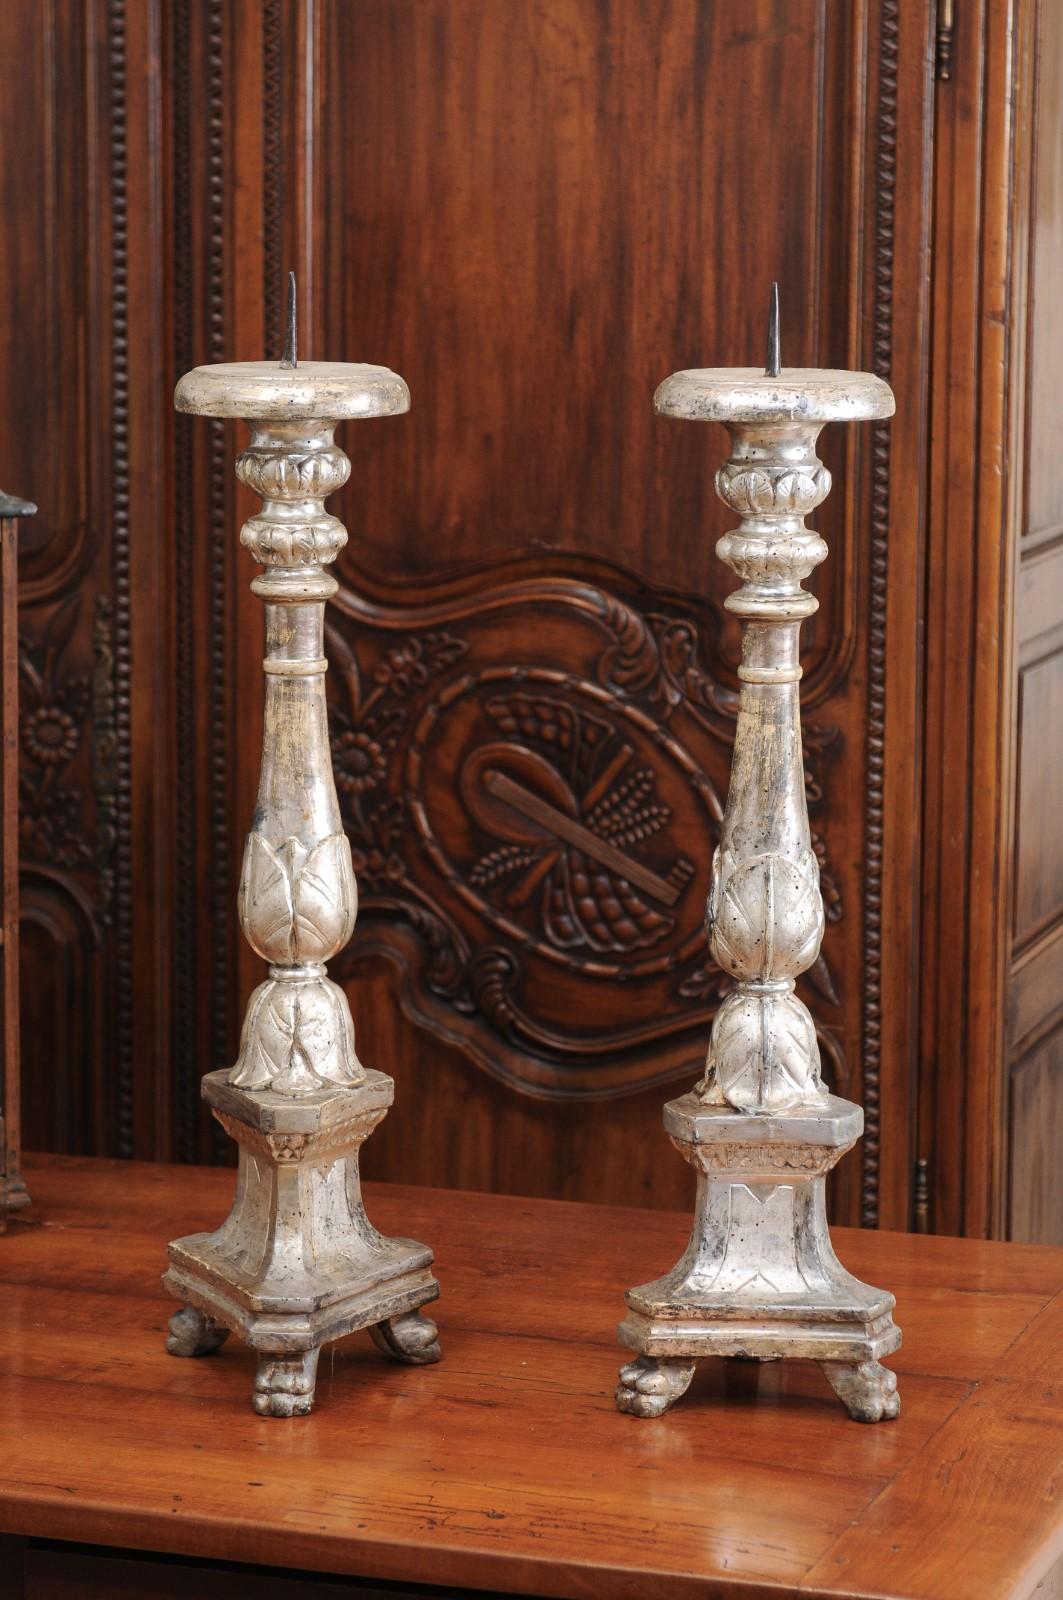 A pair of Italian silver gilt wooden candlesticks from the 18th century, with waterleaves and paw feet. Created in Italy during the 18th century, each of this pair of candlesticks is carved with delicate waterleaves and is resting on a tripod base